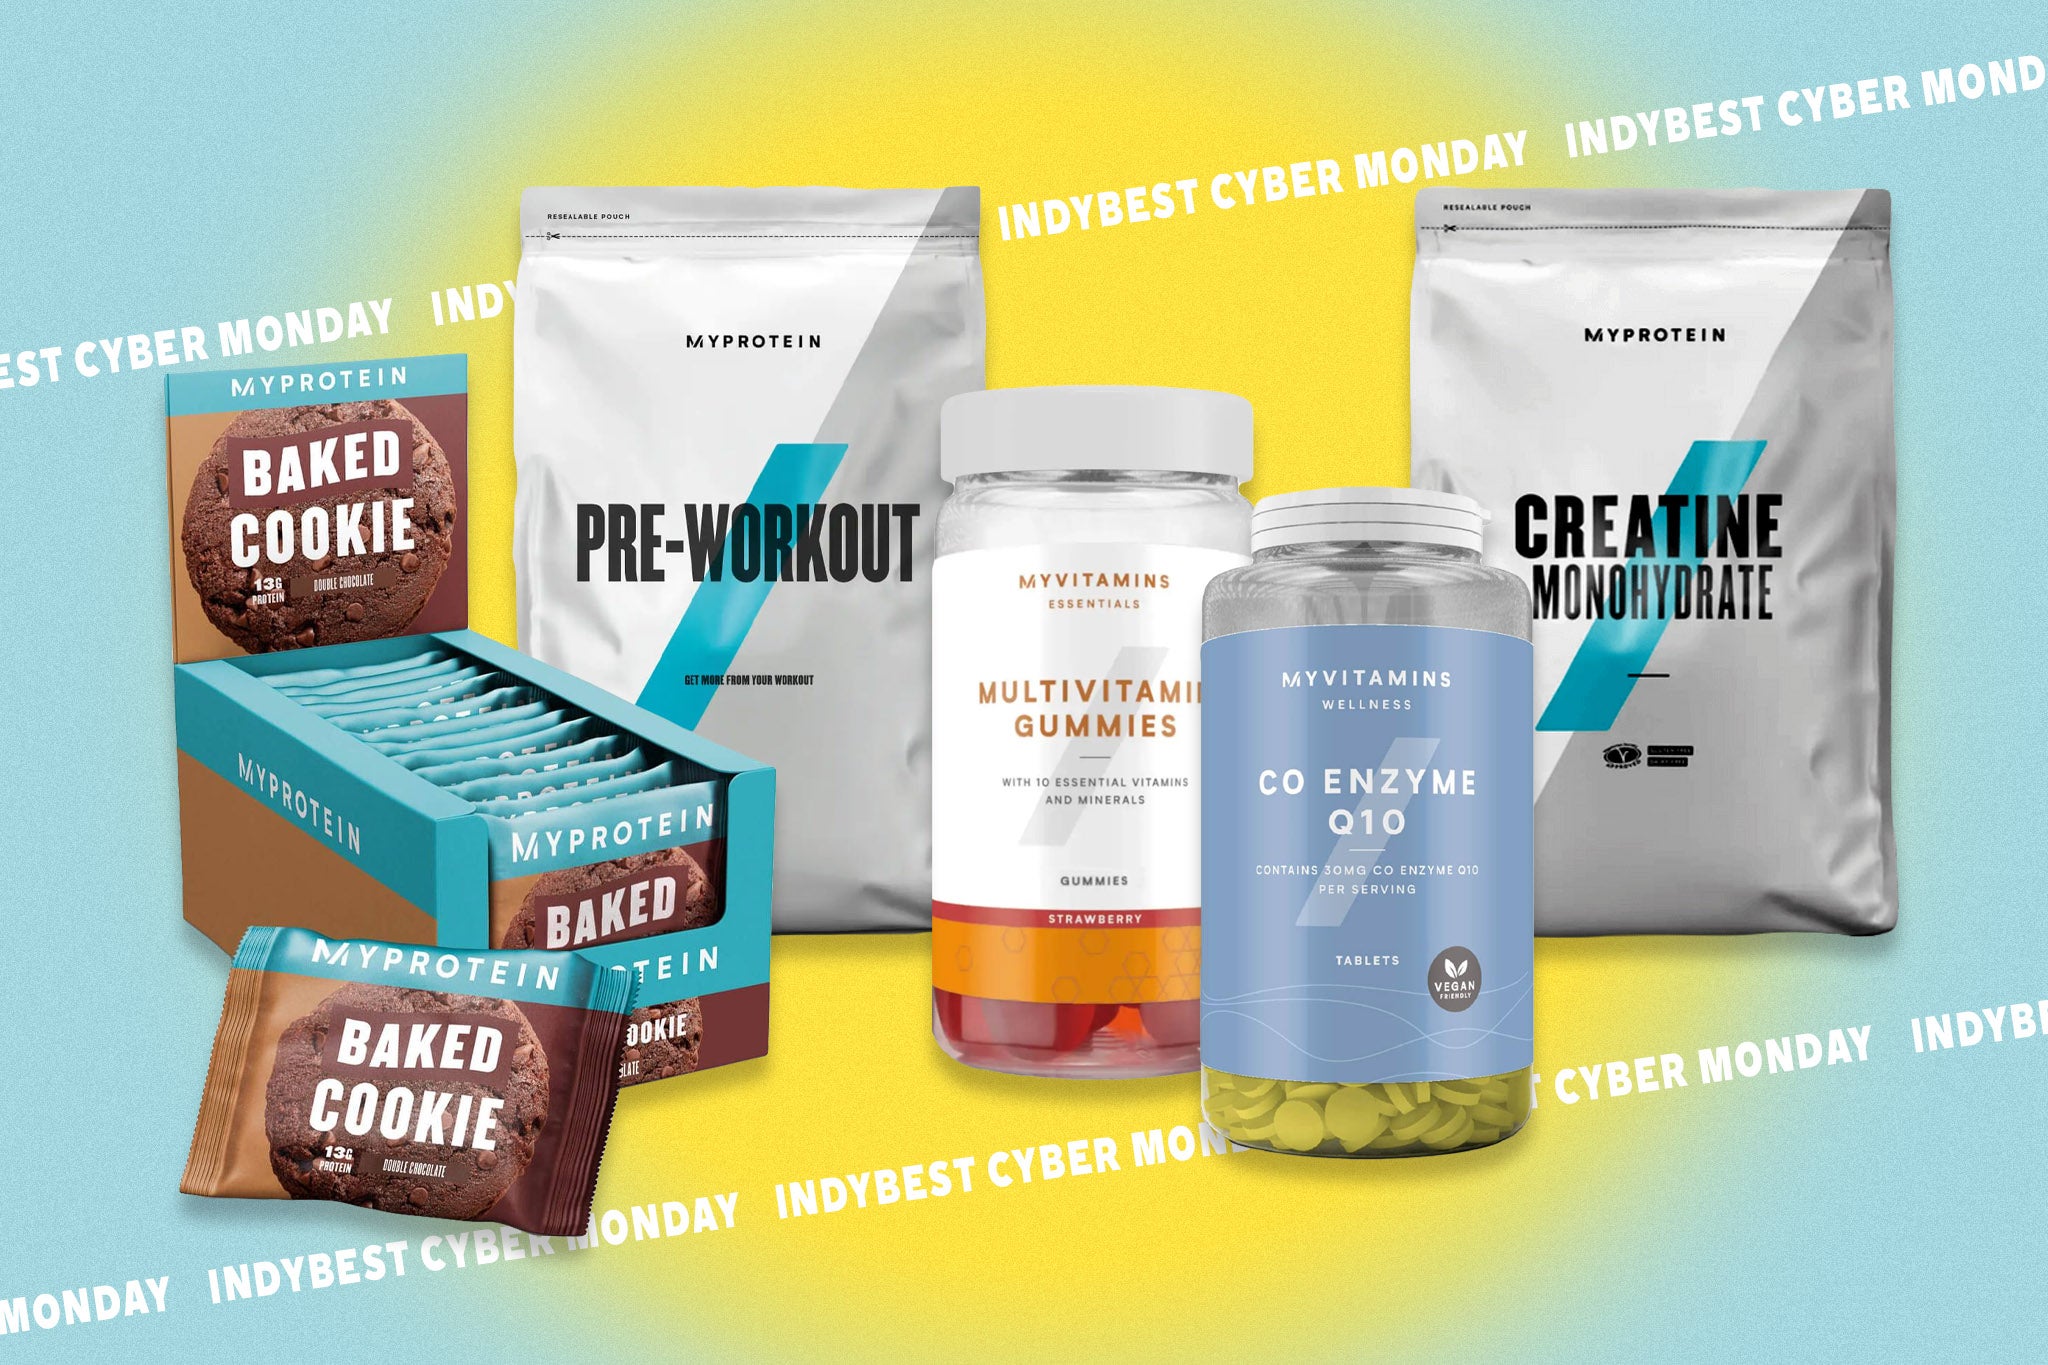 Best Cyber Monday Myprotein deals: Up to 80% off post Black Friday | The  Independent